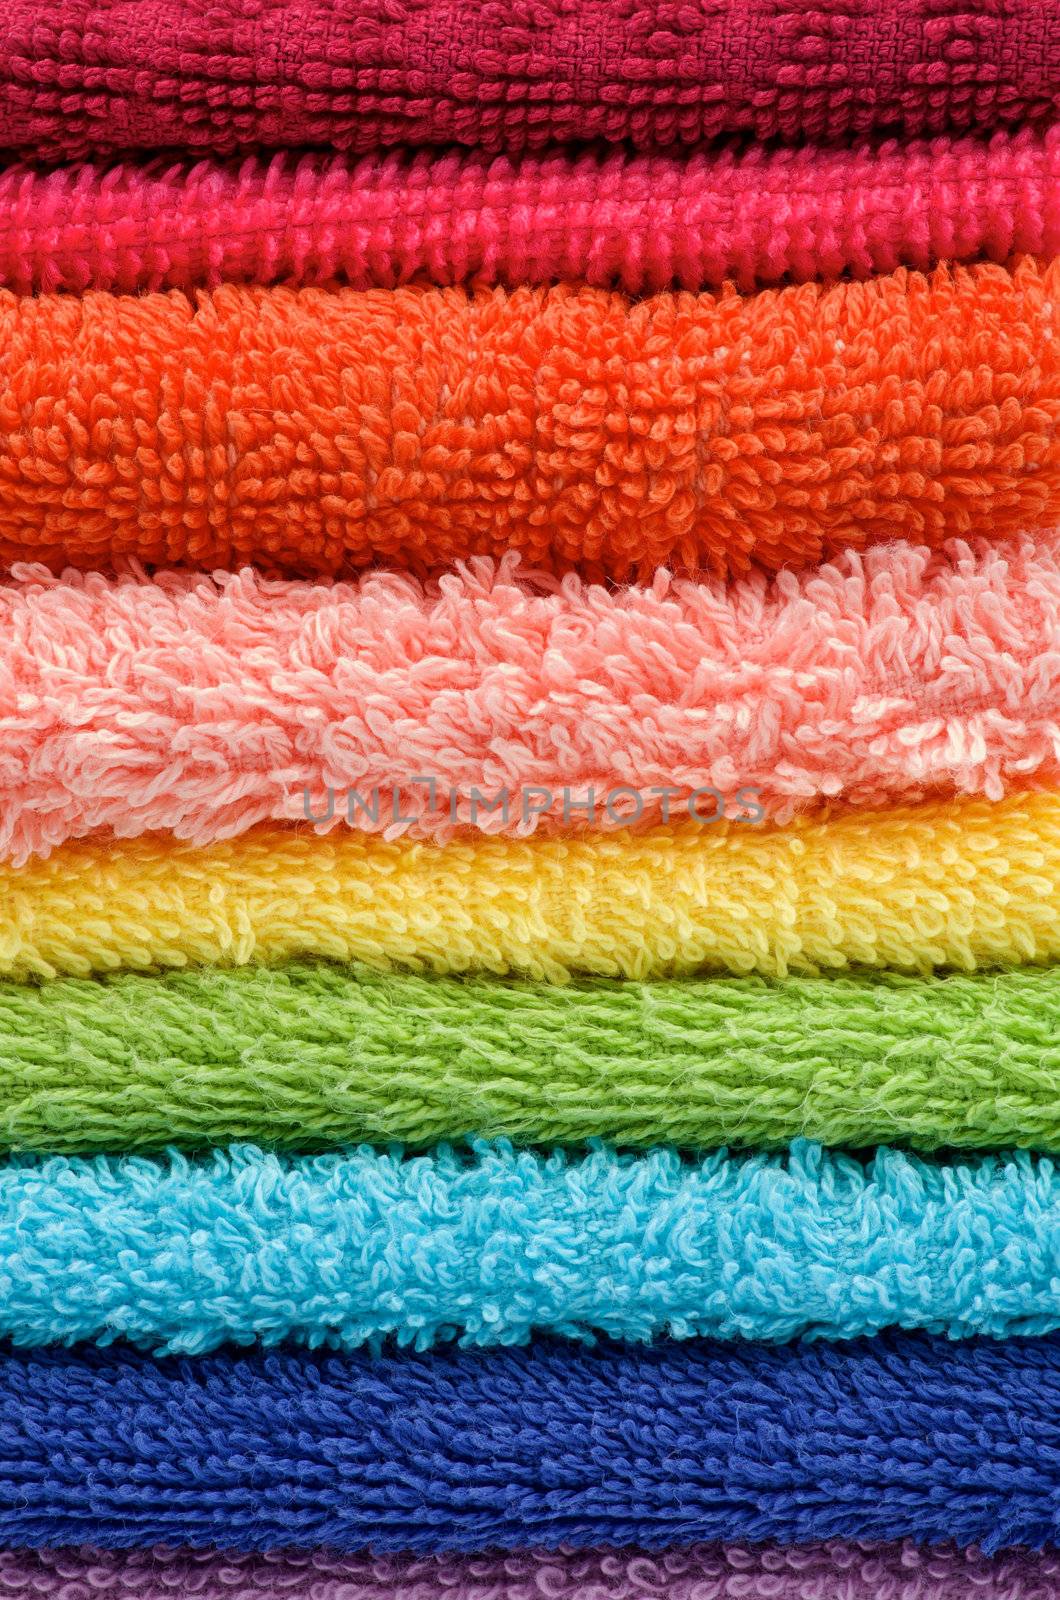 Background of Stacked Rainbow Colored Towels closeup